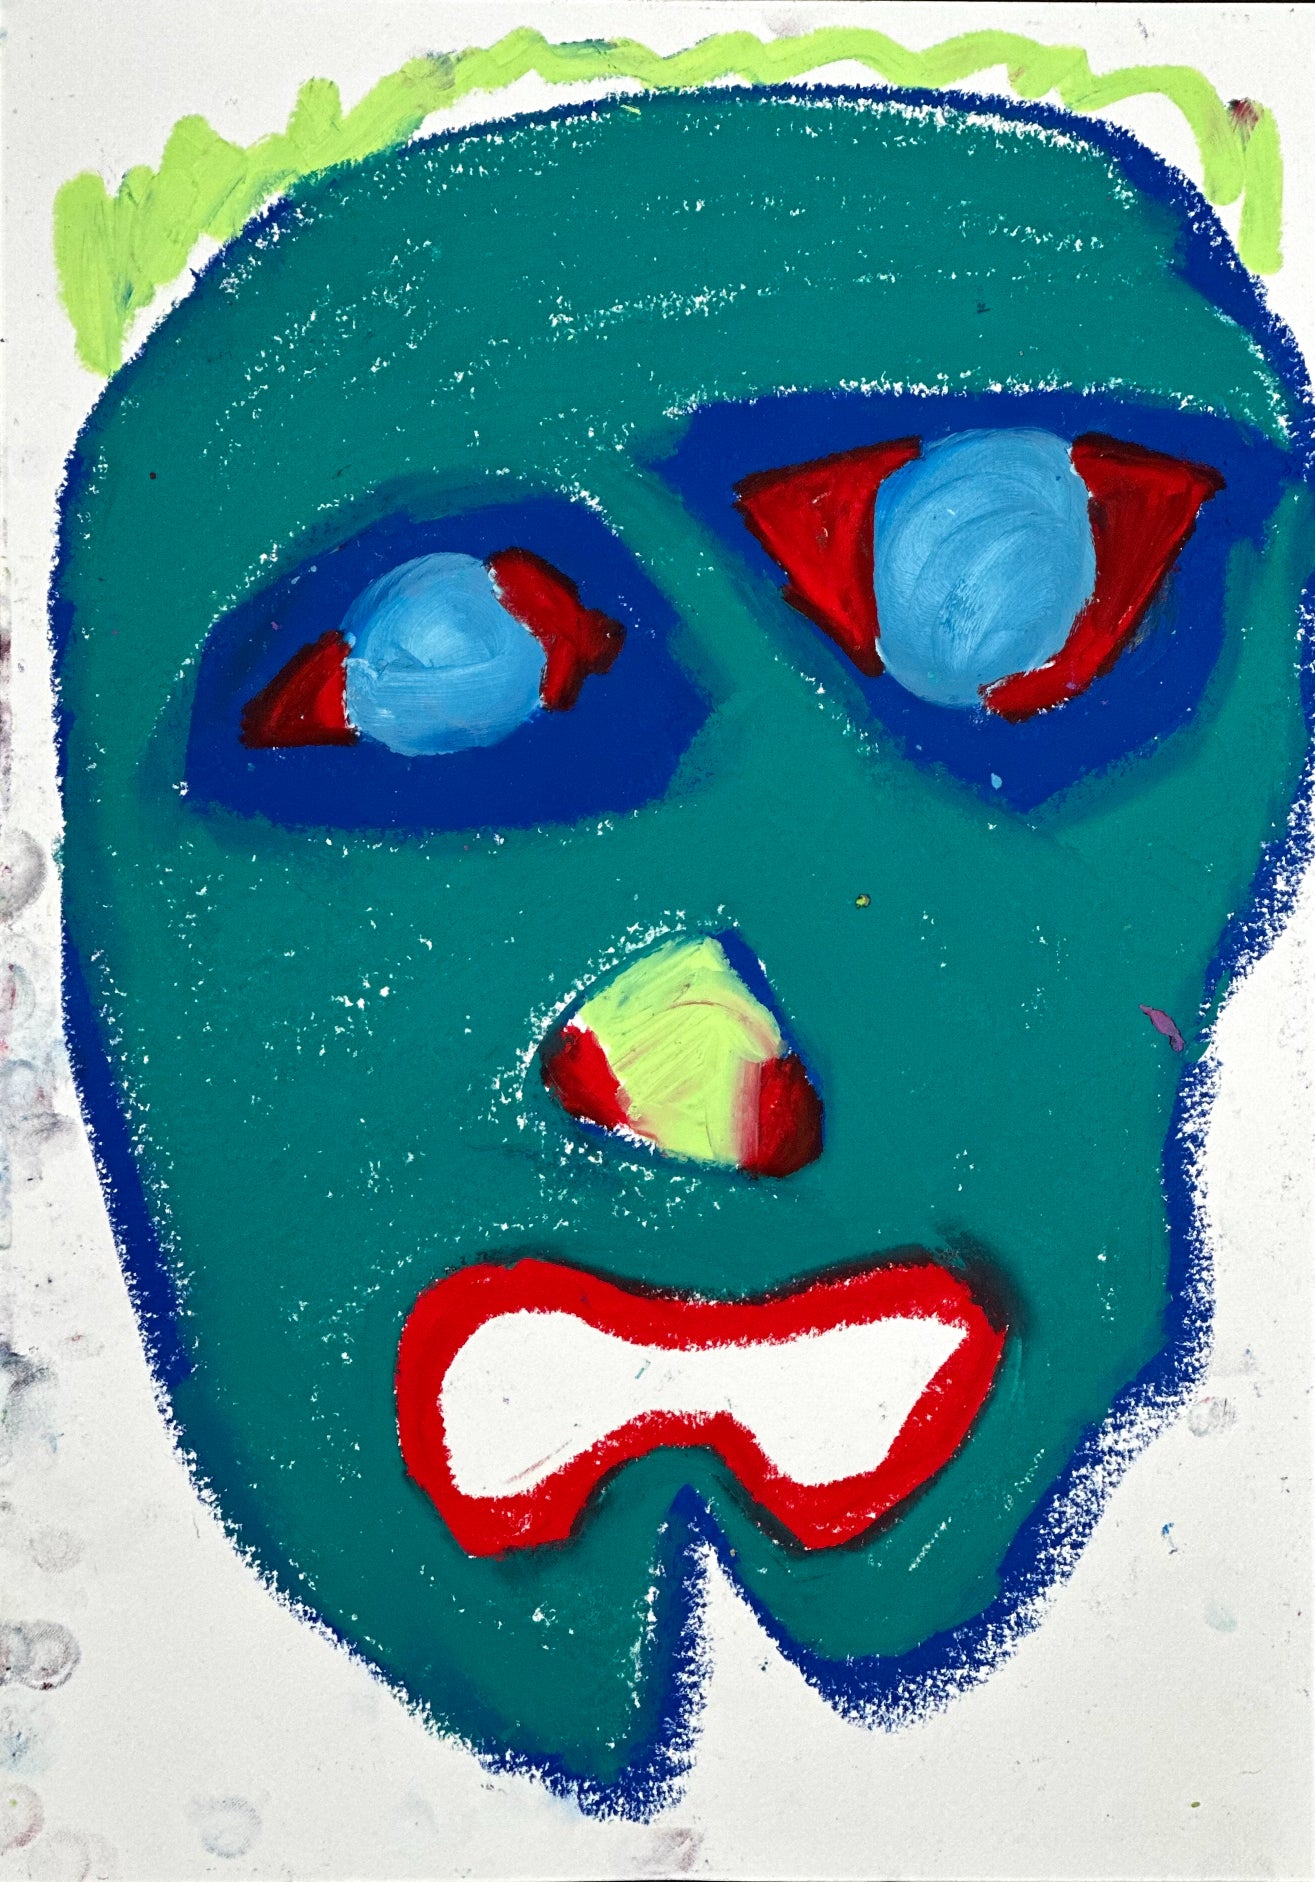 An abstract expressionist portrayal of a face with dominant green tones, accentuated by red geometric shapes around the eyes, a yellow triangle nose, and a stark white mouth, encapsulated within the transformative Sauna Fusion Art series by Lenfantvivant. 